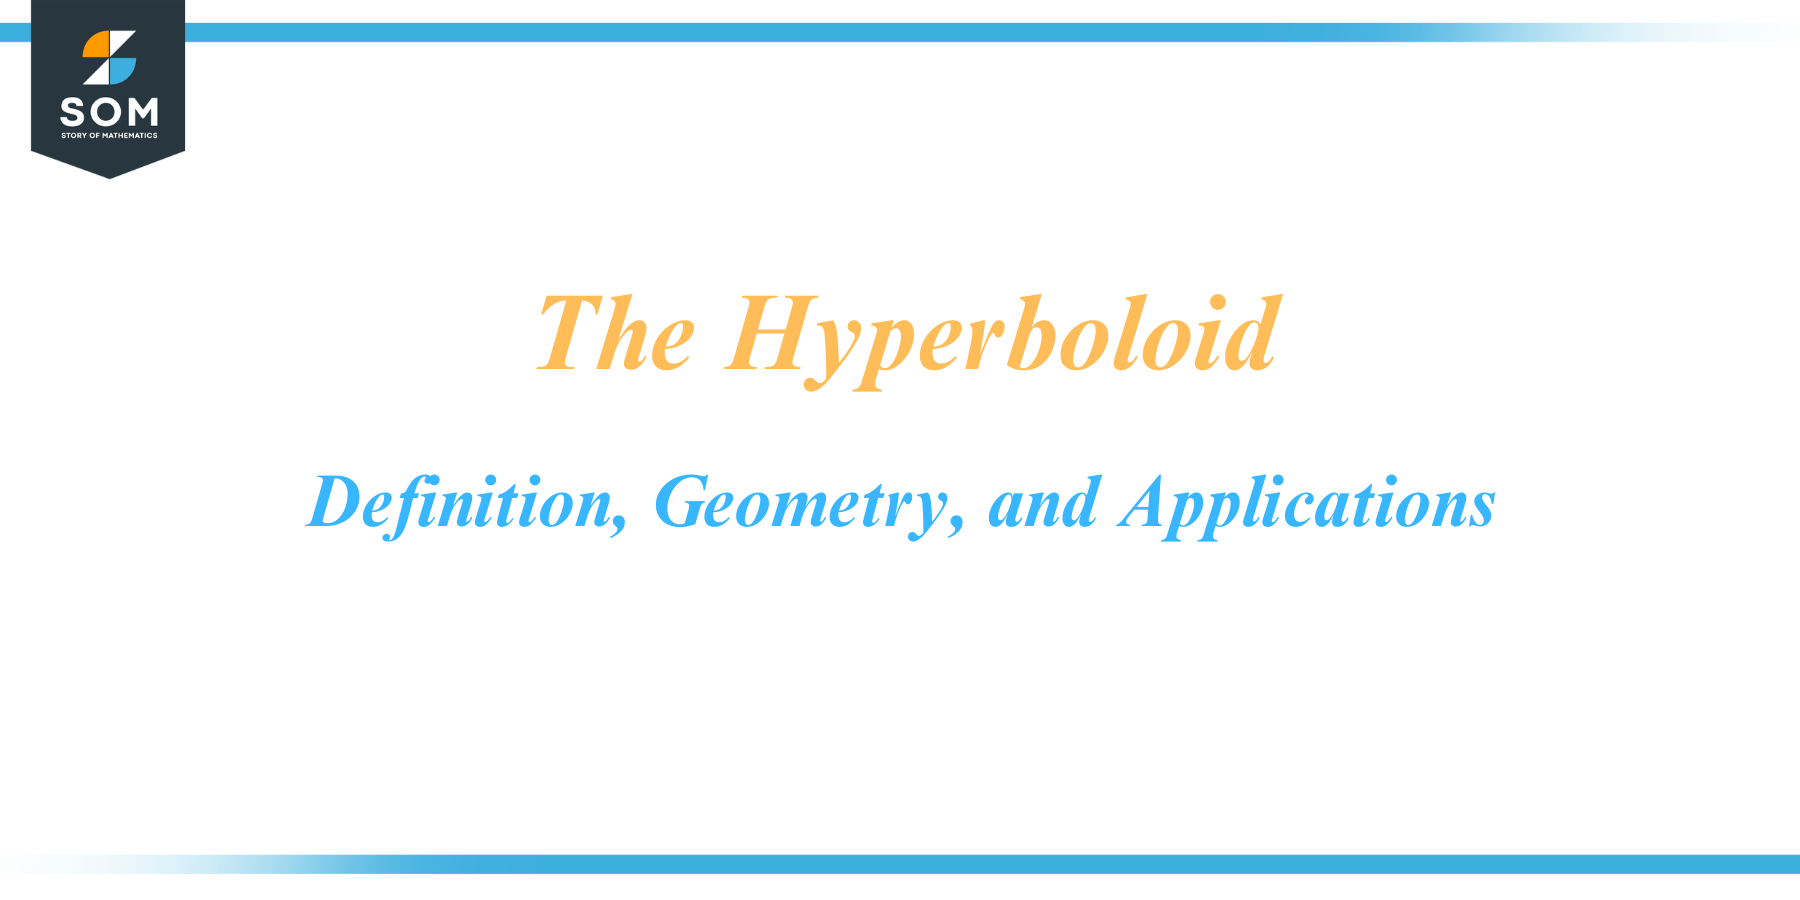 The Hyperboloid Definition Geometry and Applications